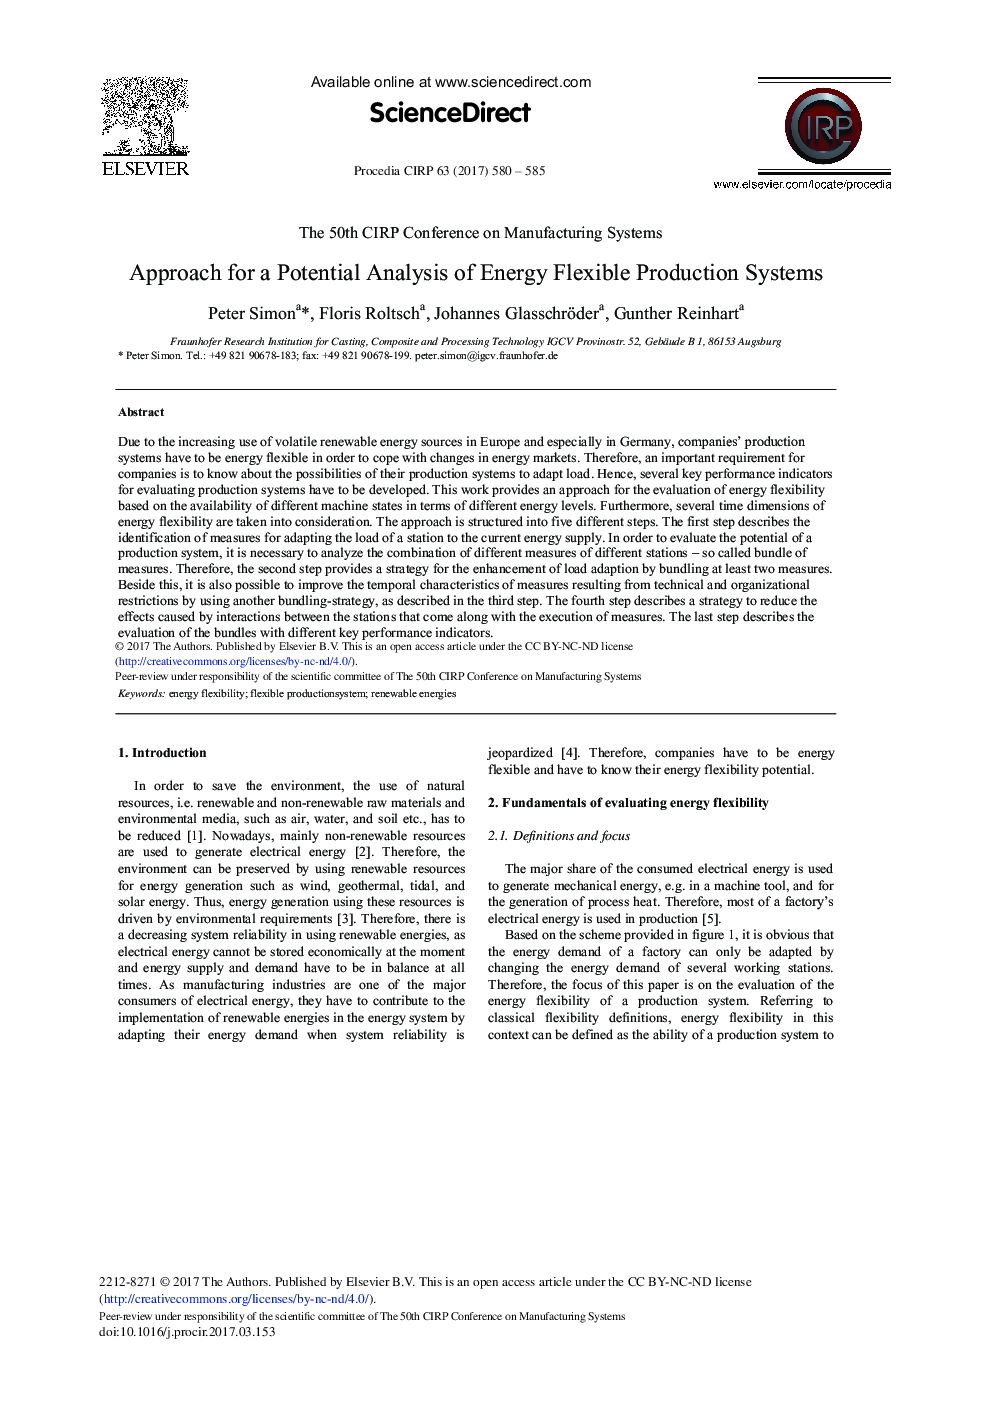 Approach for a Potential Analysis of Energy Flexible Production Systems